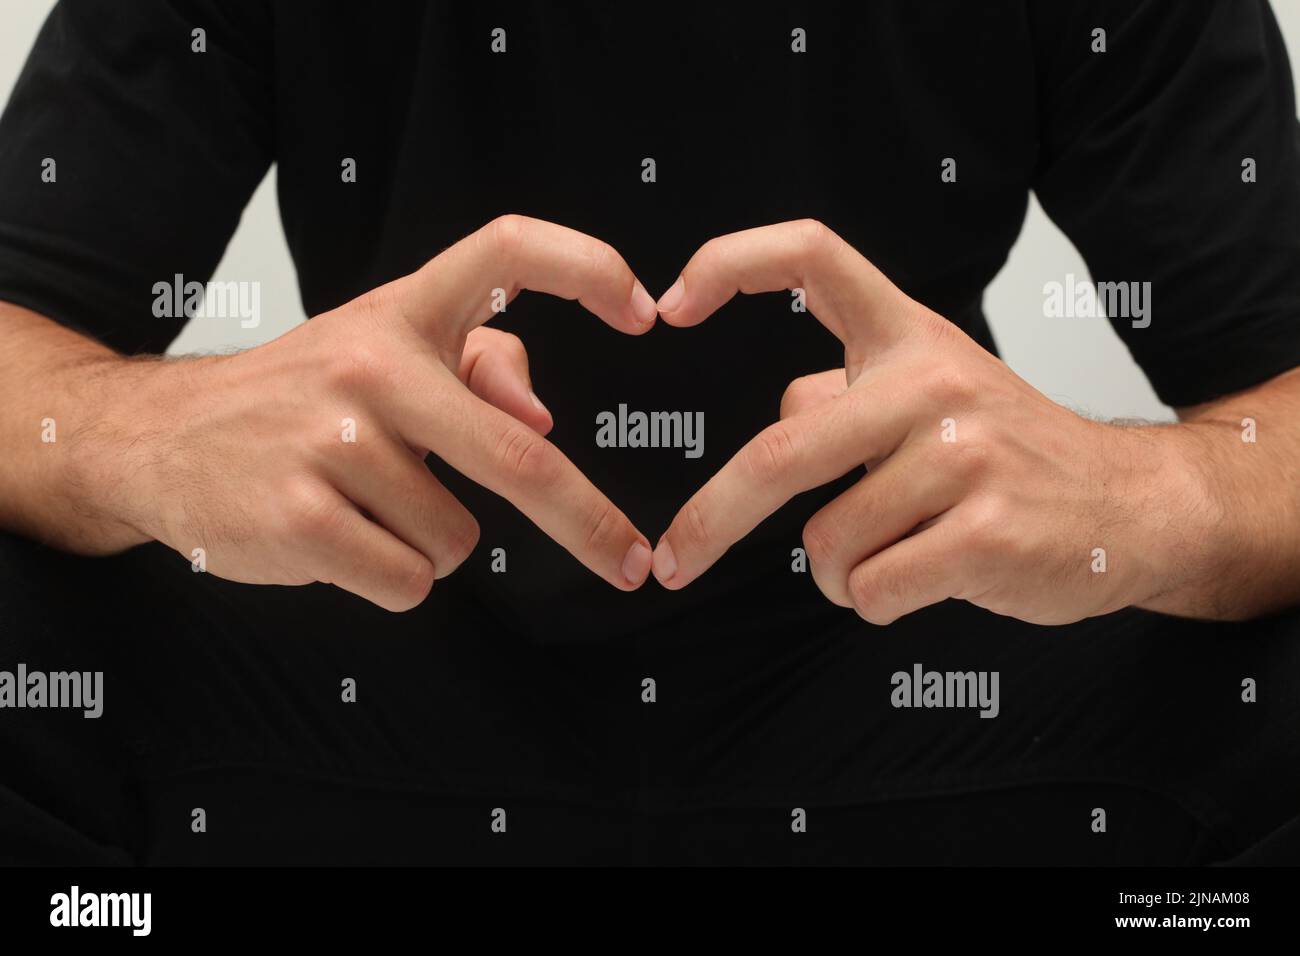 Man's hands showing heart symbol, isolated on black. A man in black showing heart symbol with his fingers. Love gesture concept. Stock Photo